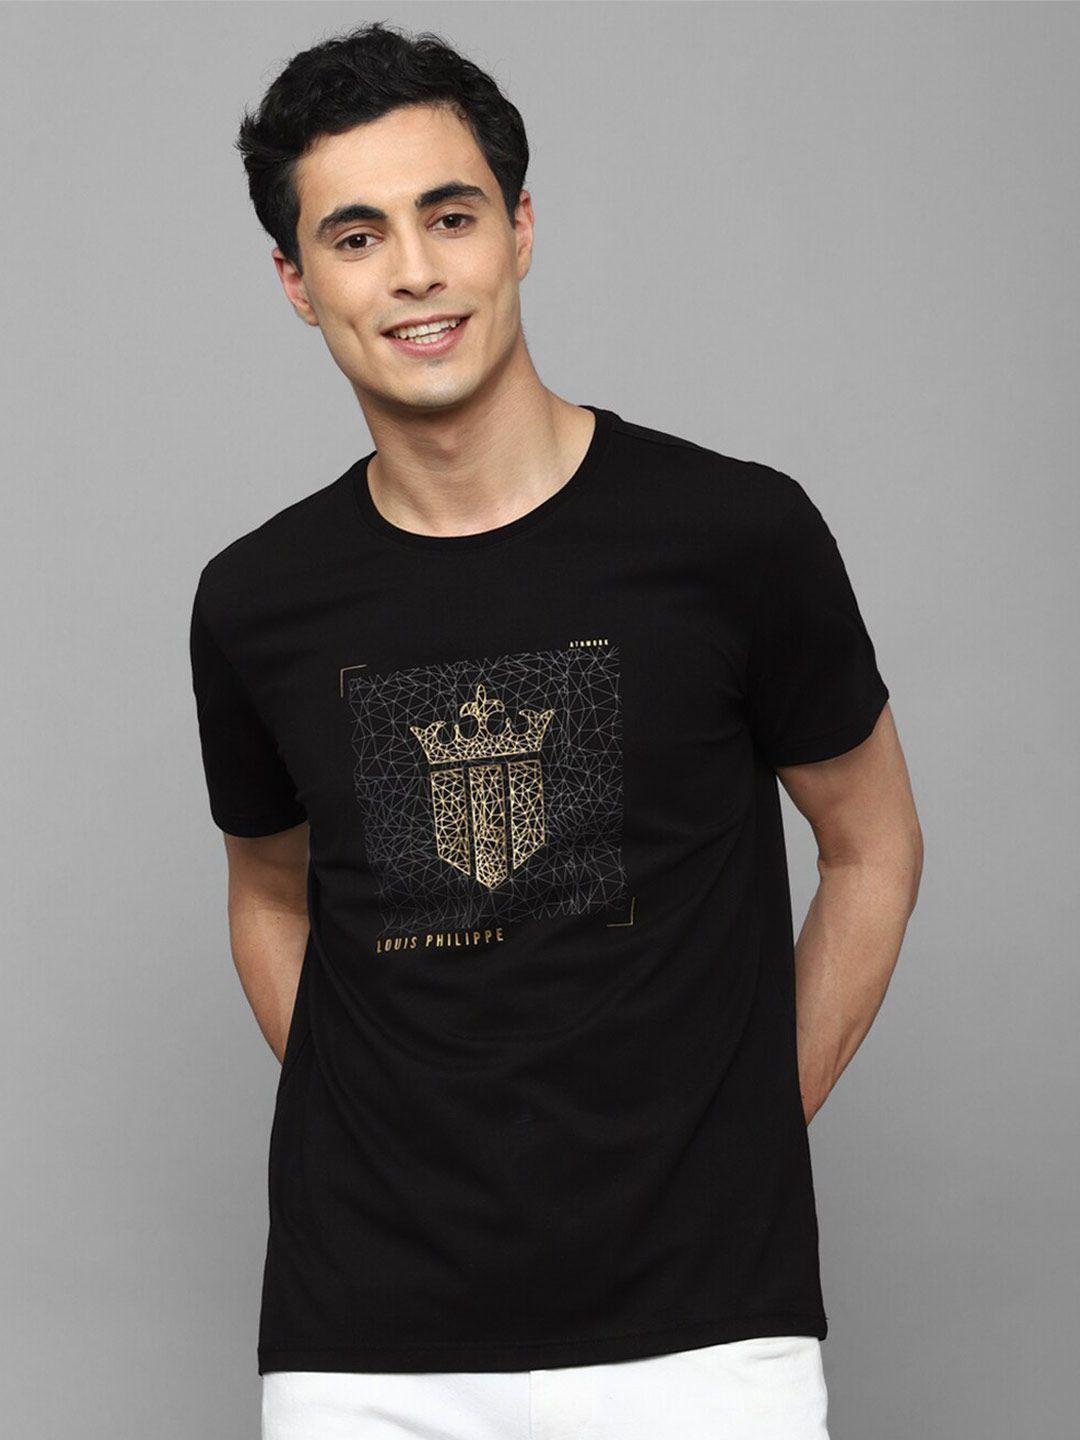 louis philippe sport typography printed slim fit pure cotton t-shirt